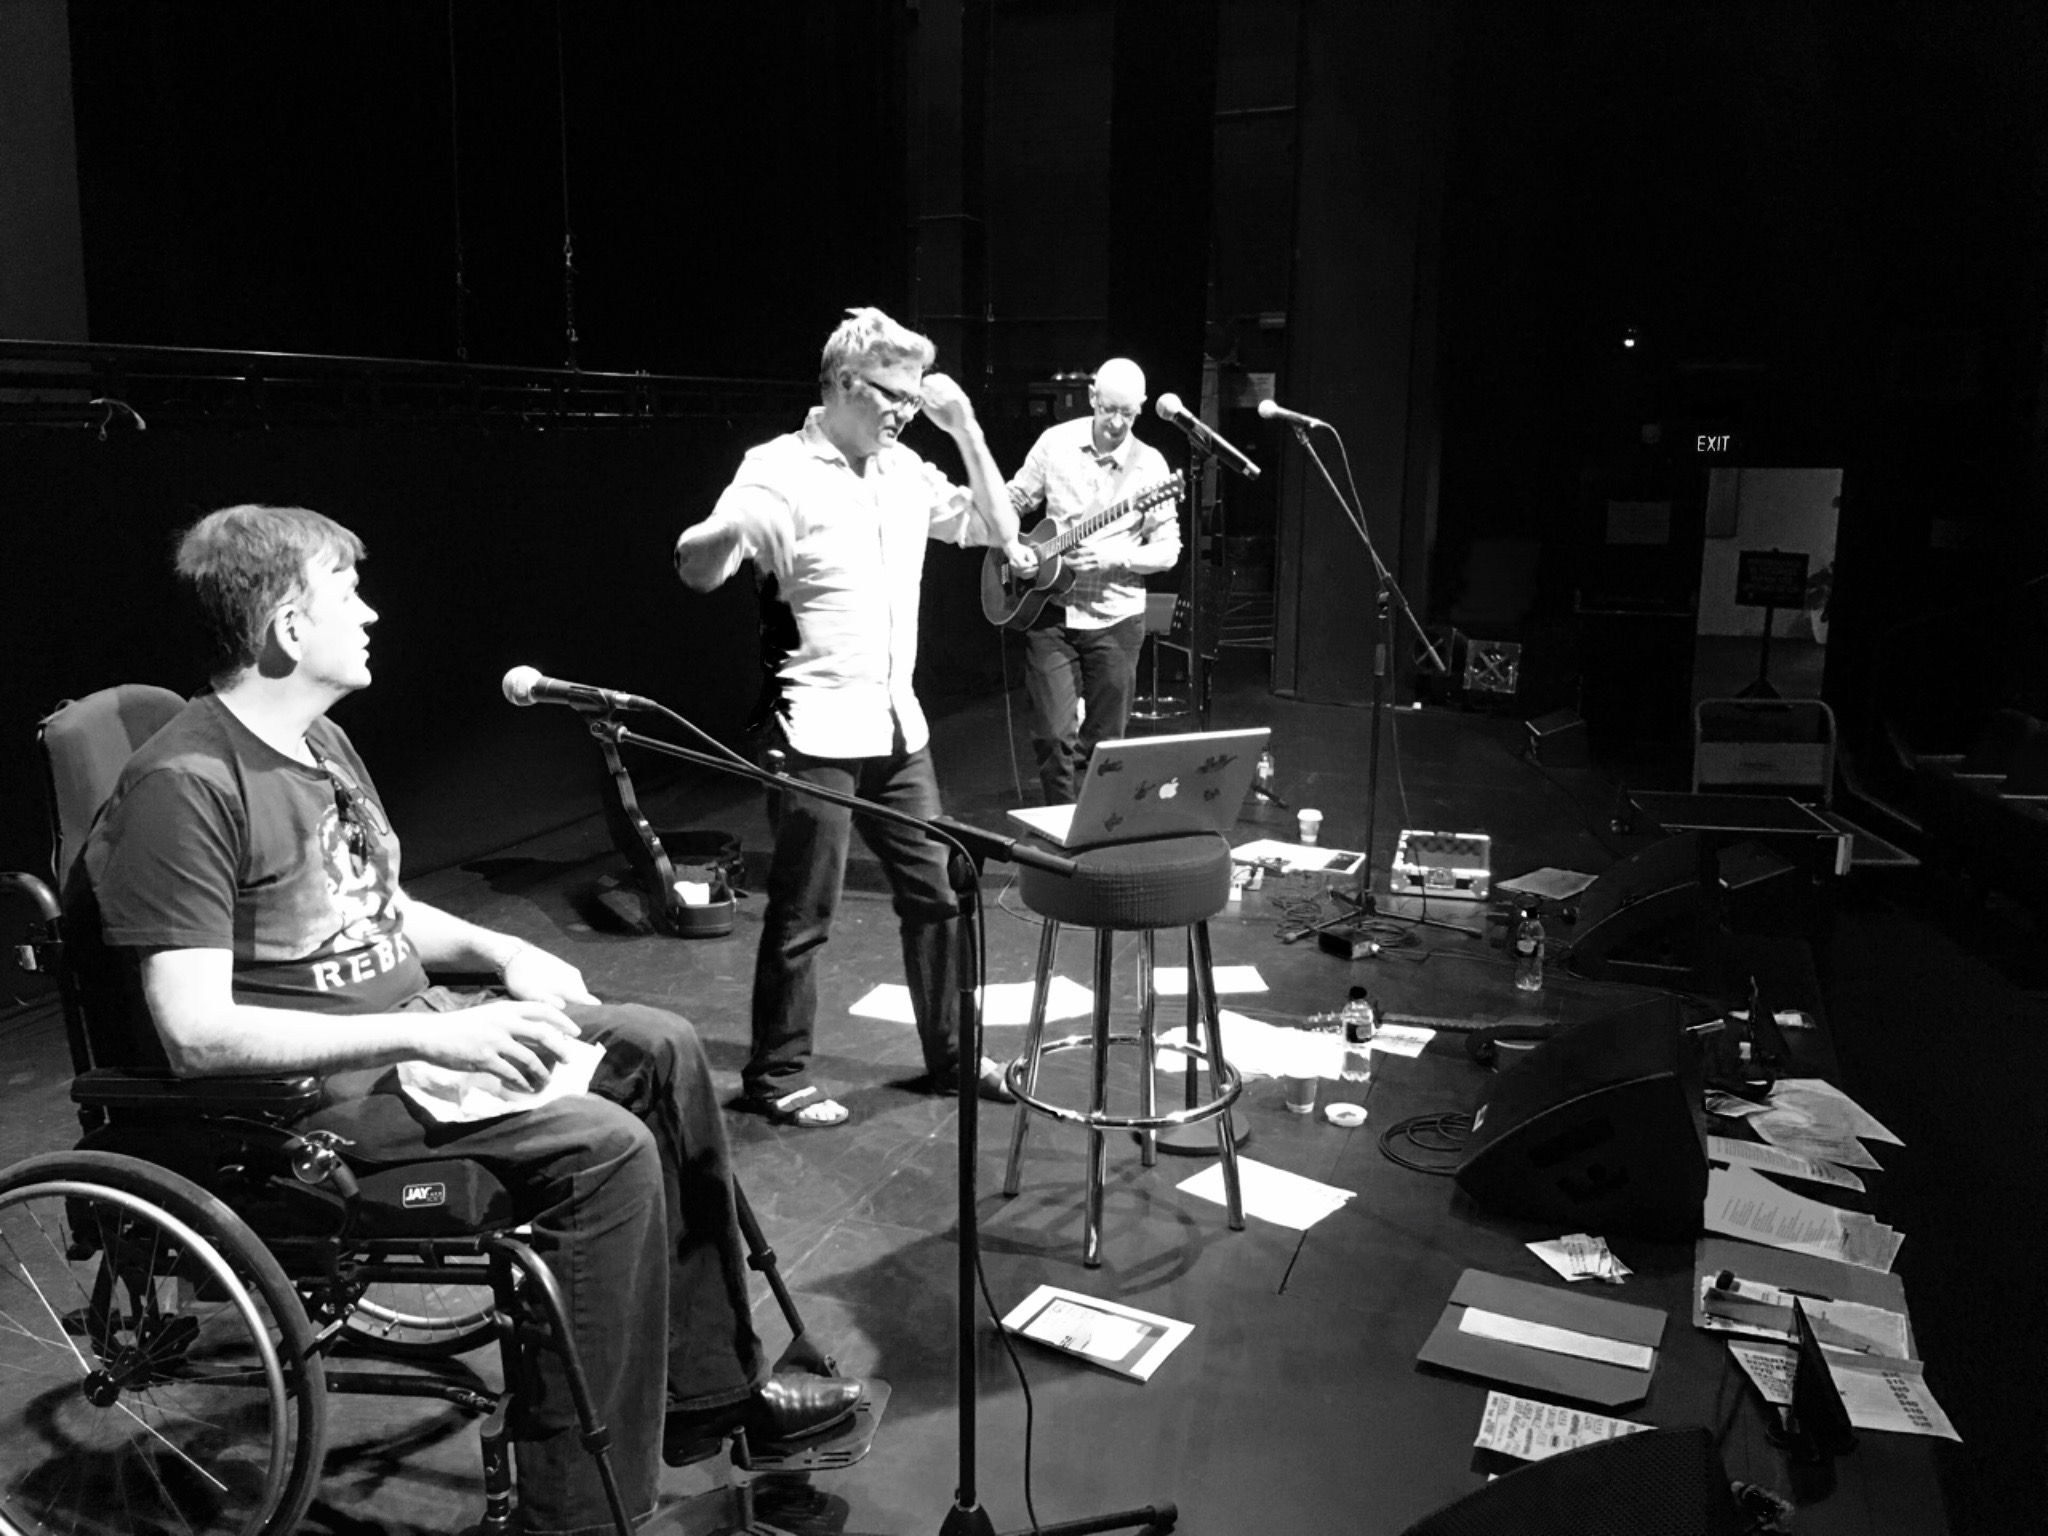 DAAS REHEARSE ON STAGE bw great